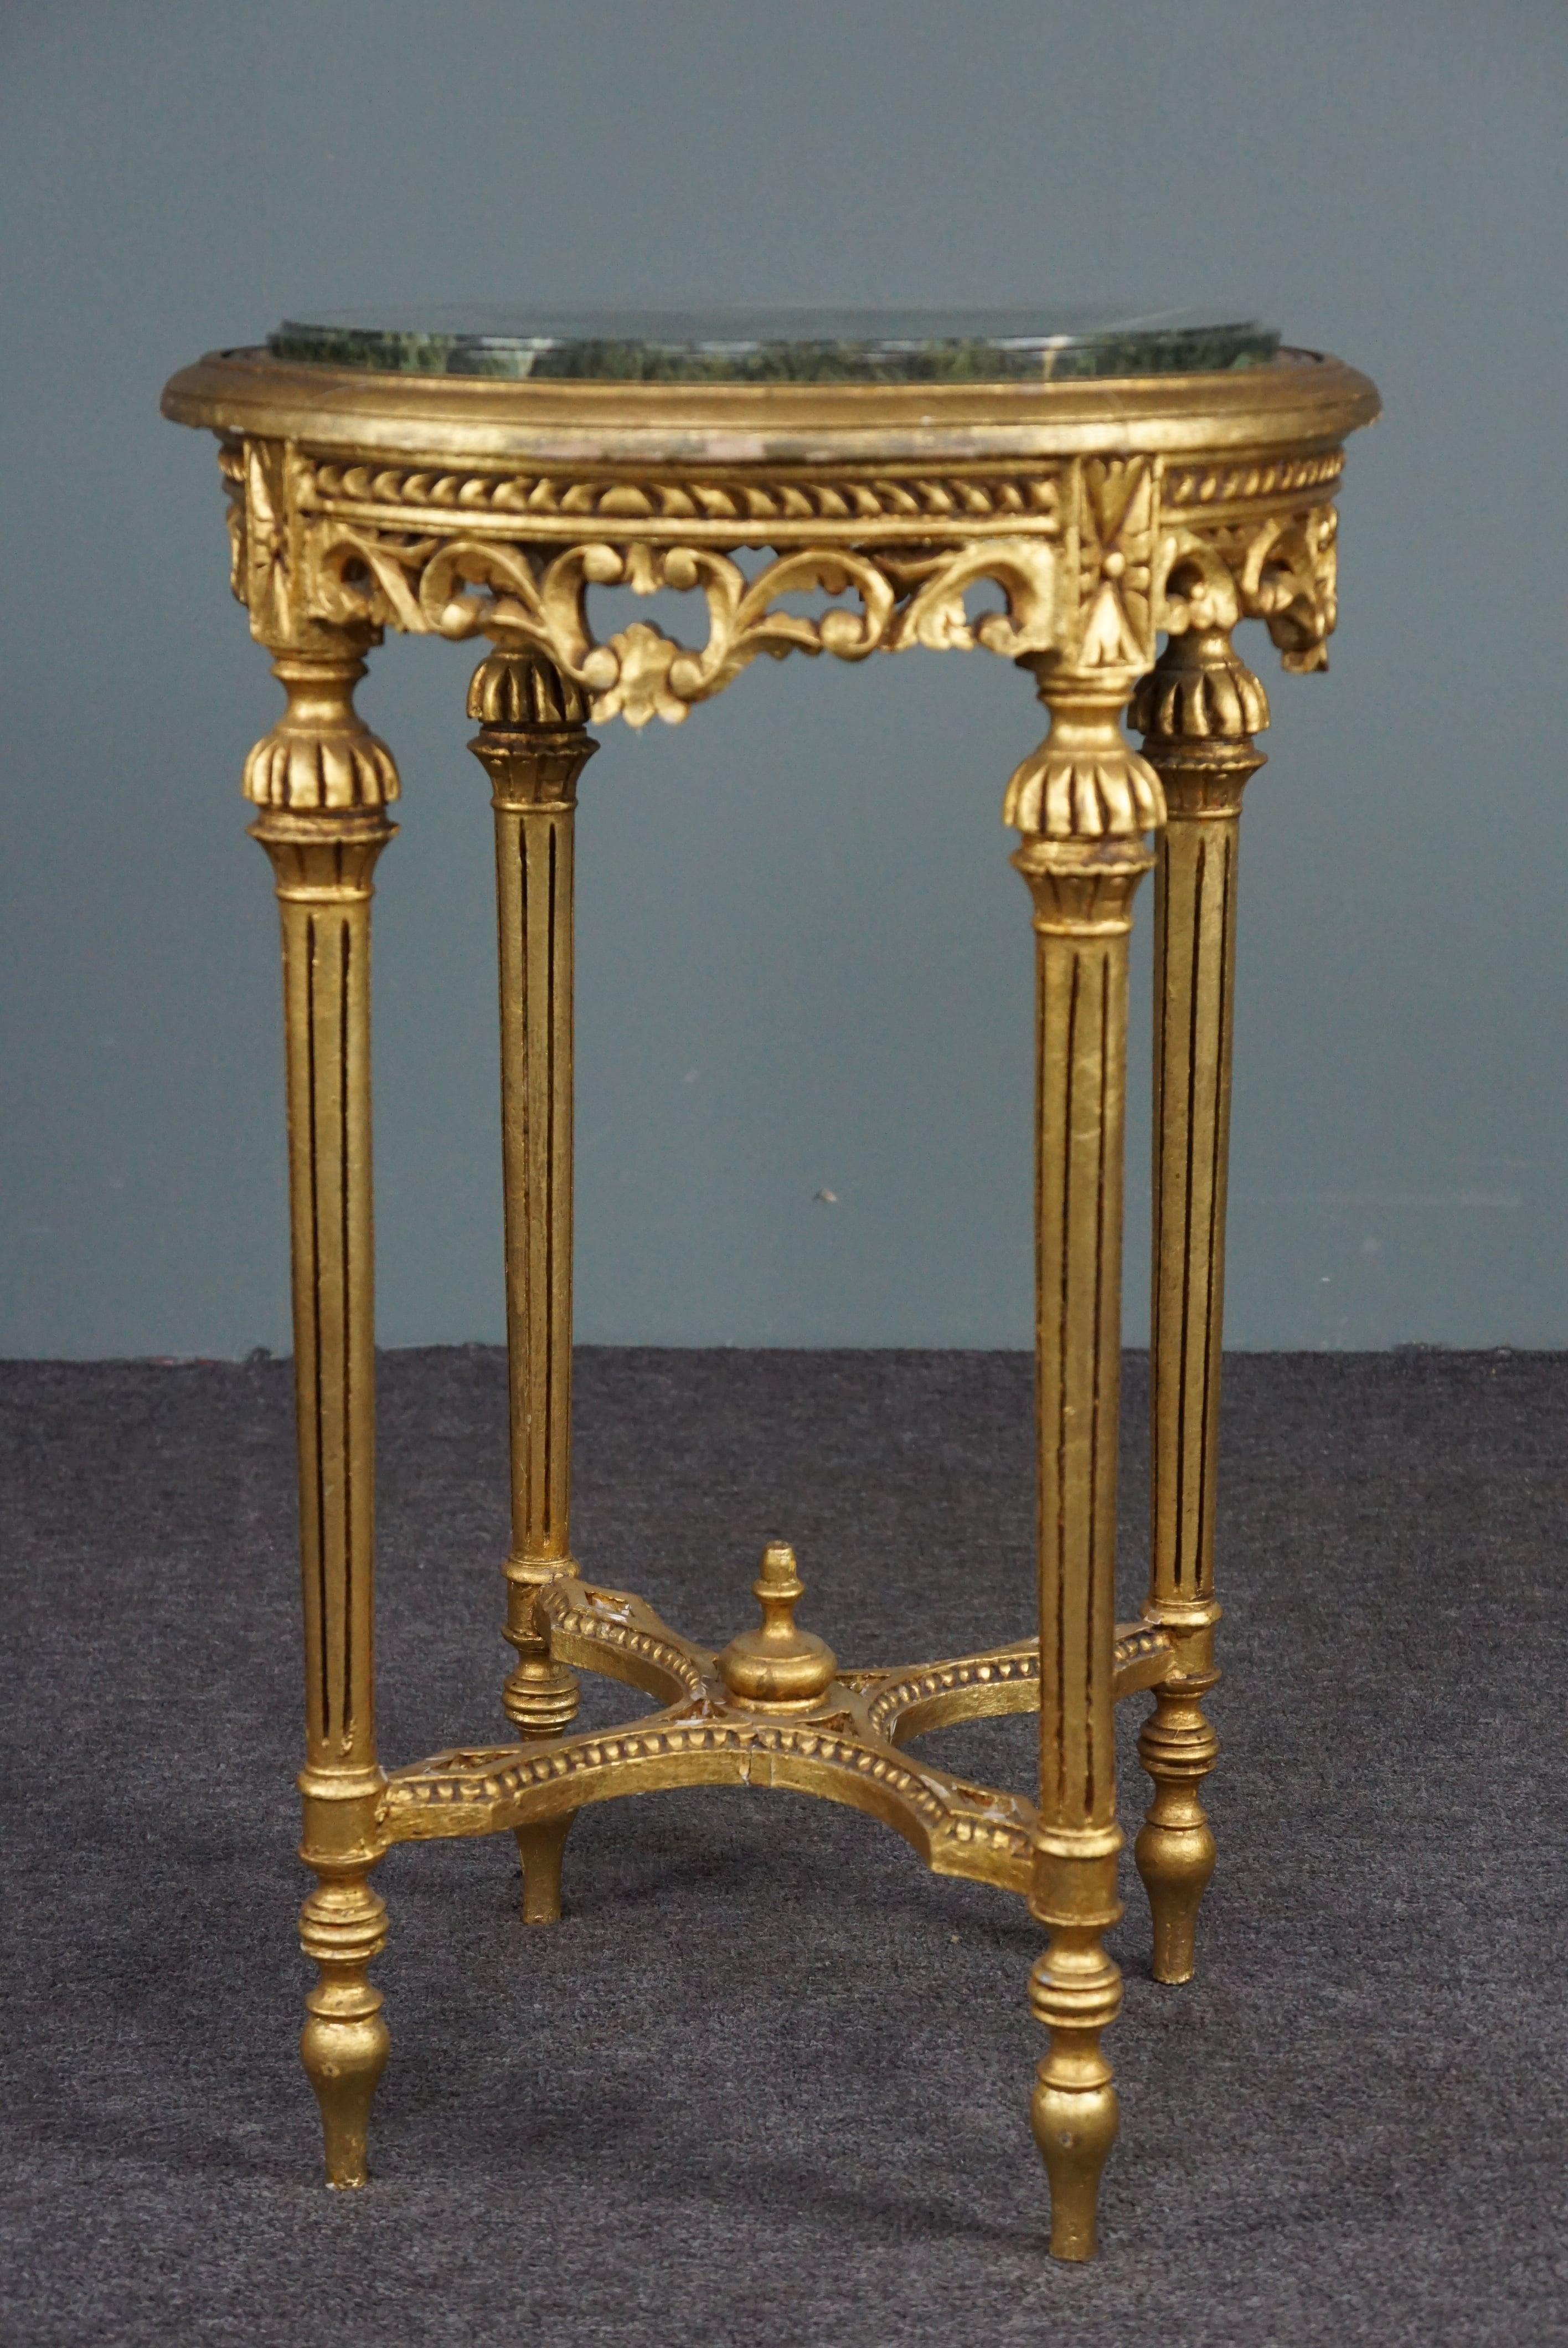 This amazing Italian marble plant stand/table has a beautiful green marble top and a base gilded with gold leaf.

This plant stand from the early 1900s full of details can also be used as a display piece. The hand-carved wood covered with gold leaf